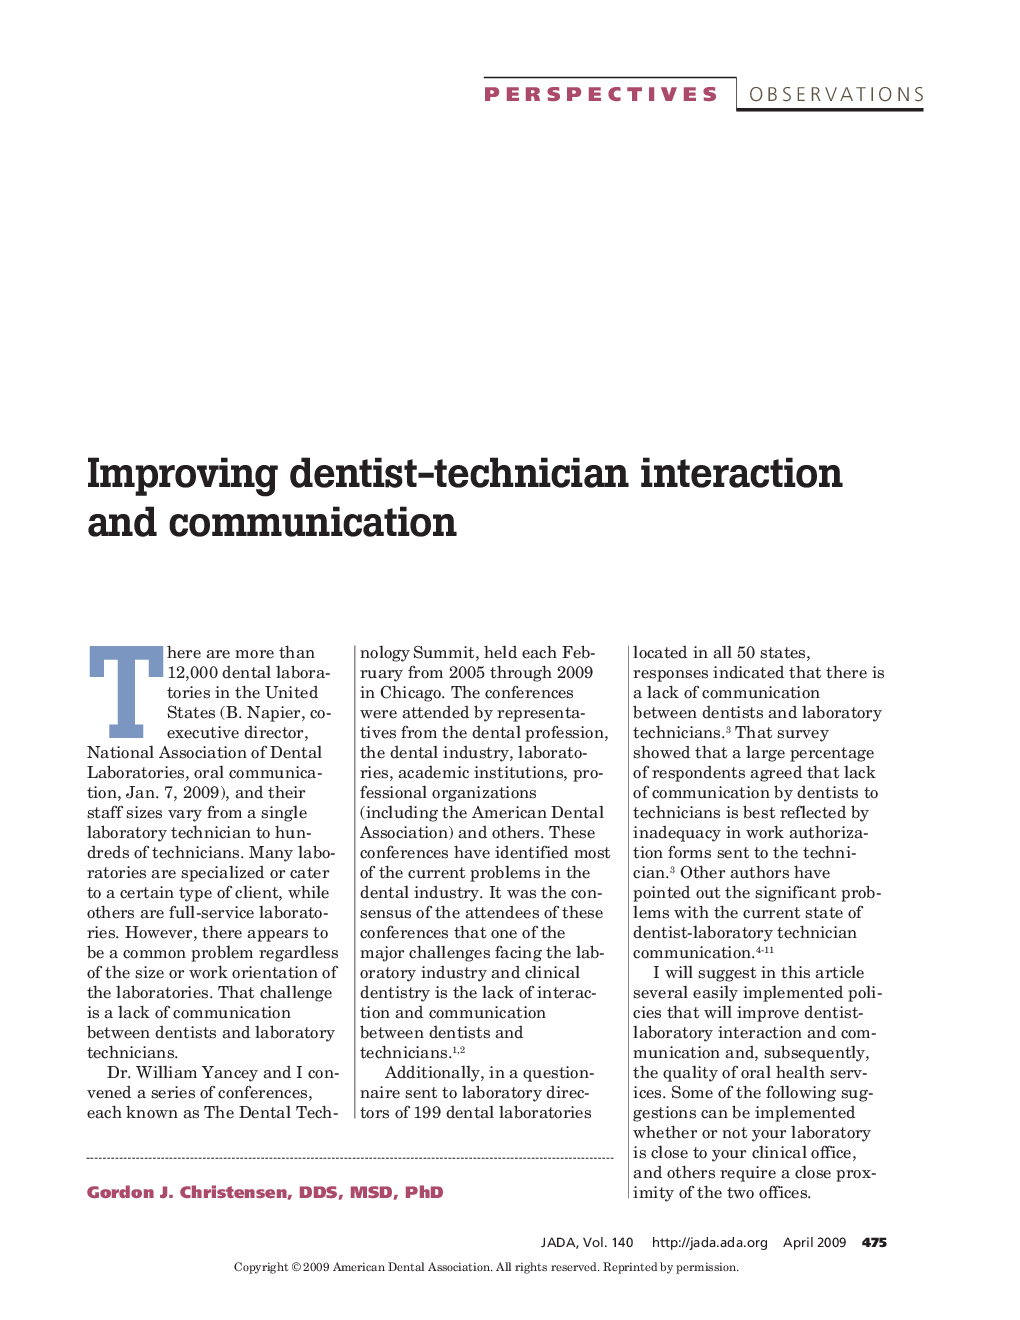 Improving Dentist-Technician Interaction and Communication